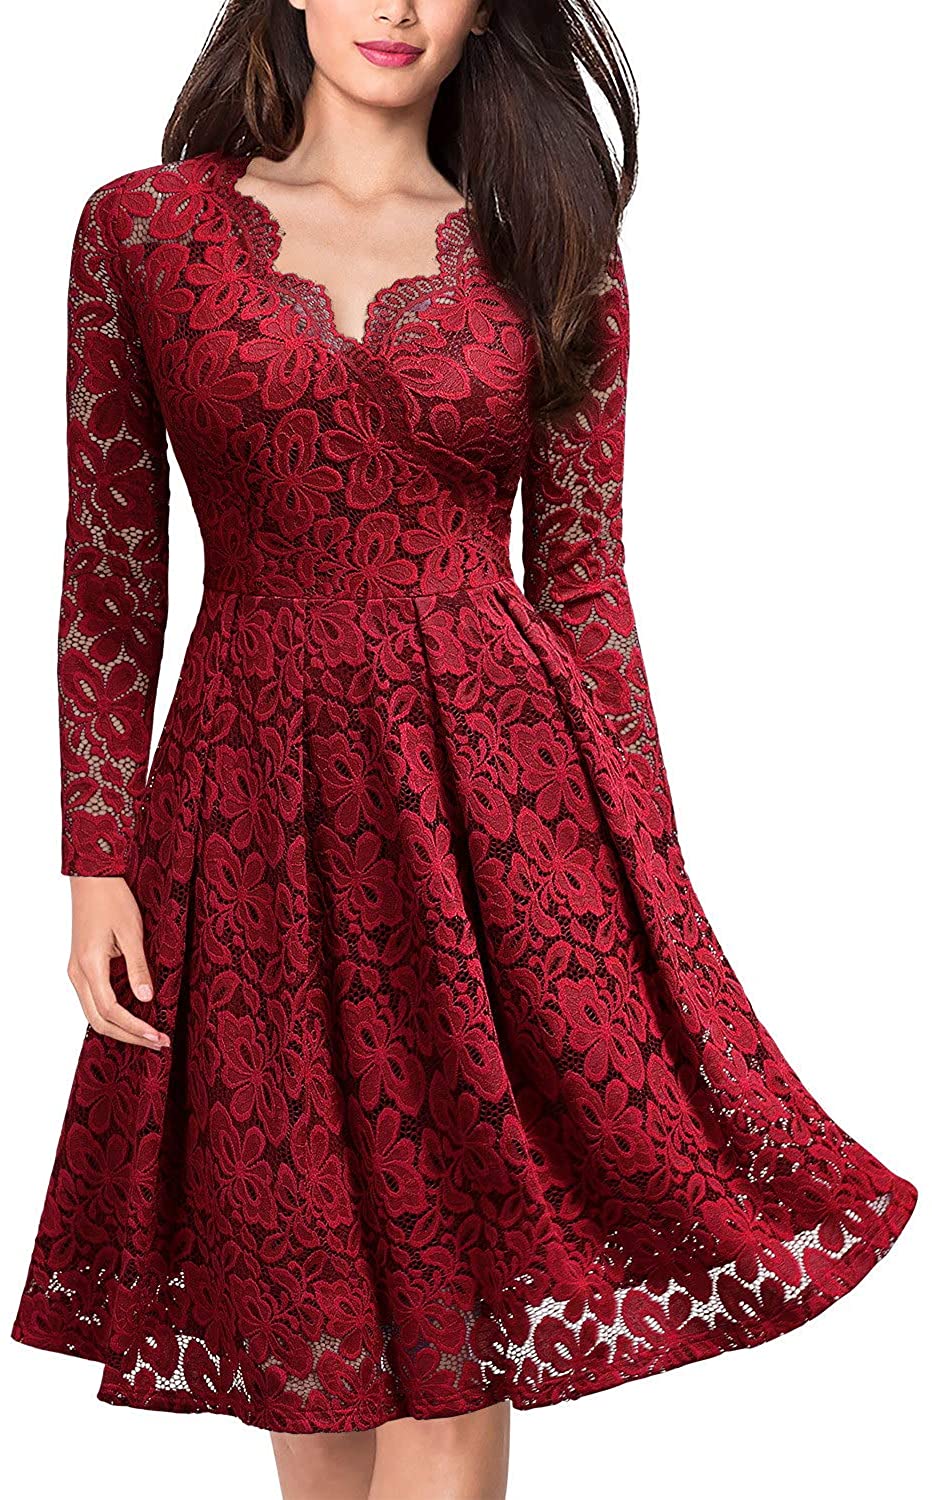 Women's New Vintage Lace Formal Wedding Cocktail Evening Party Retro Swing Dress 